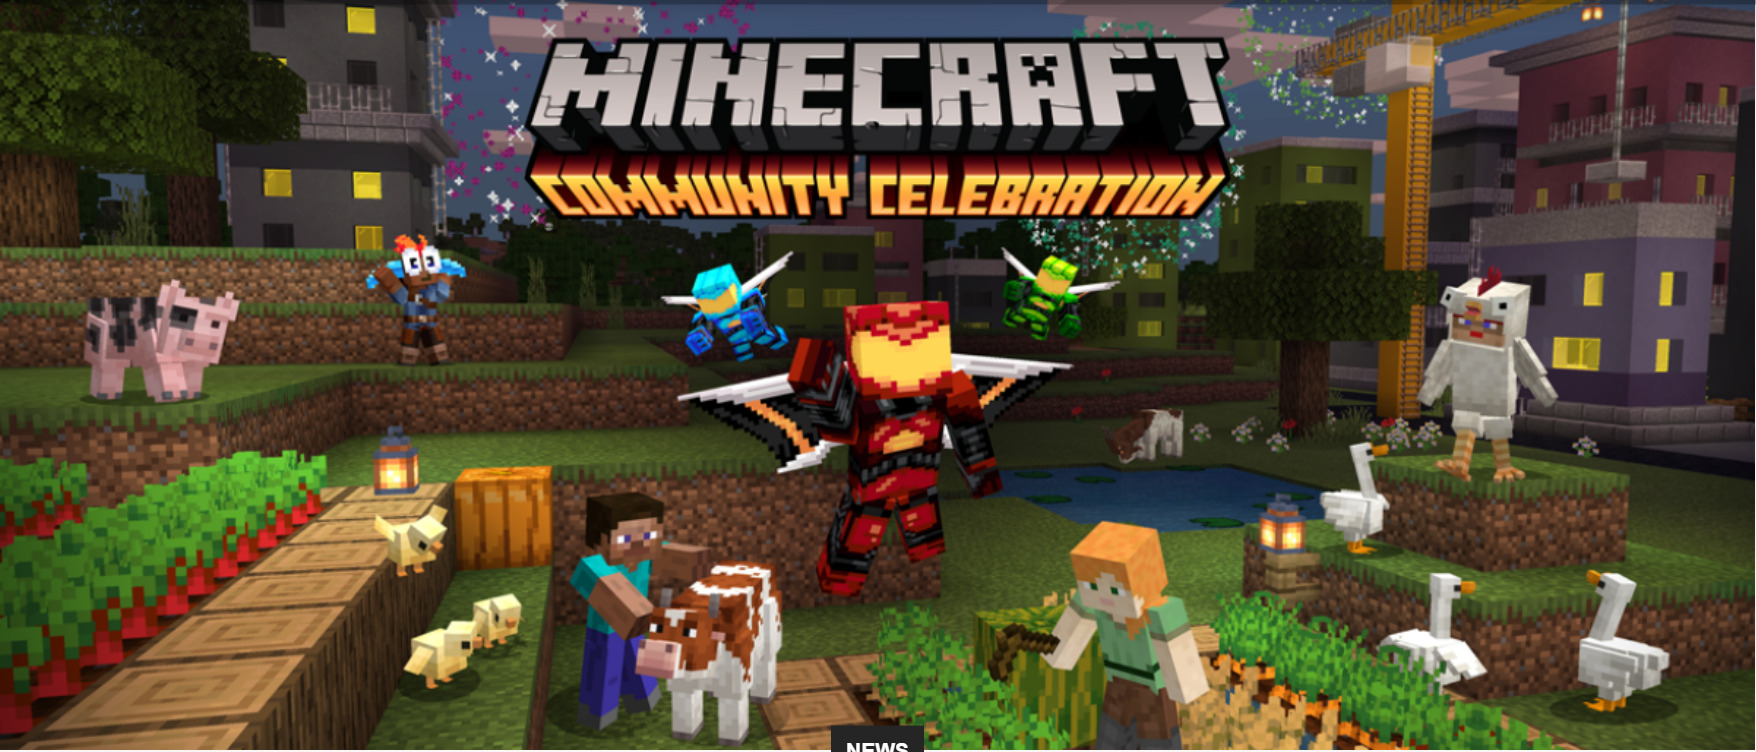 Minecraft Is Currently Having A Celebration, Giving Away Free Items And User Content